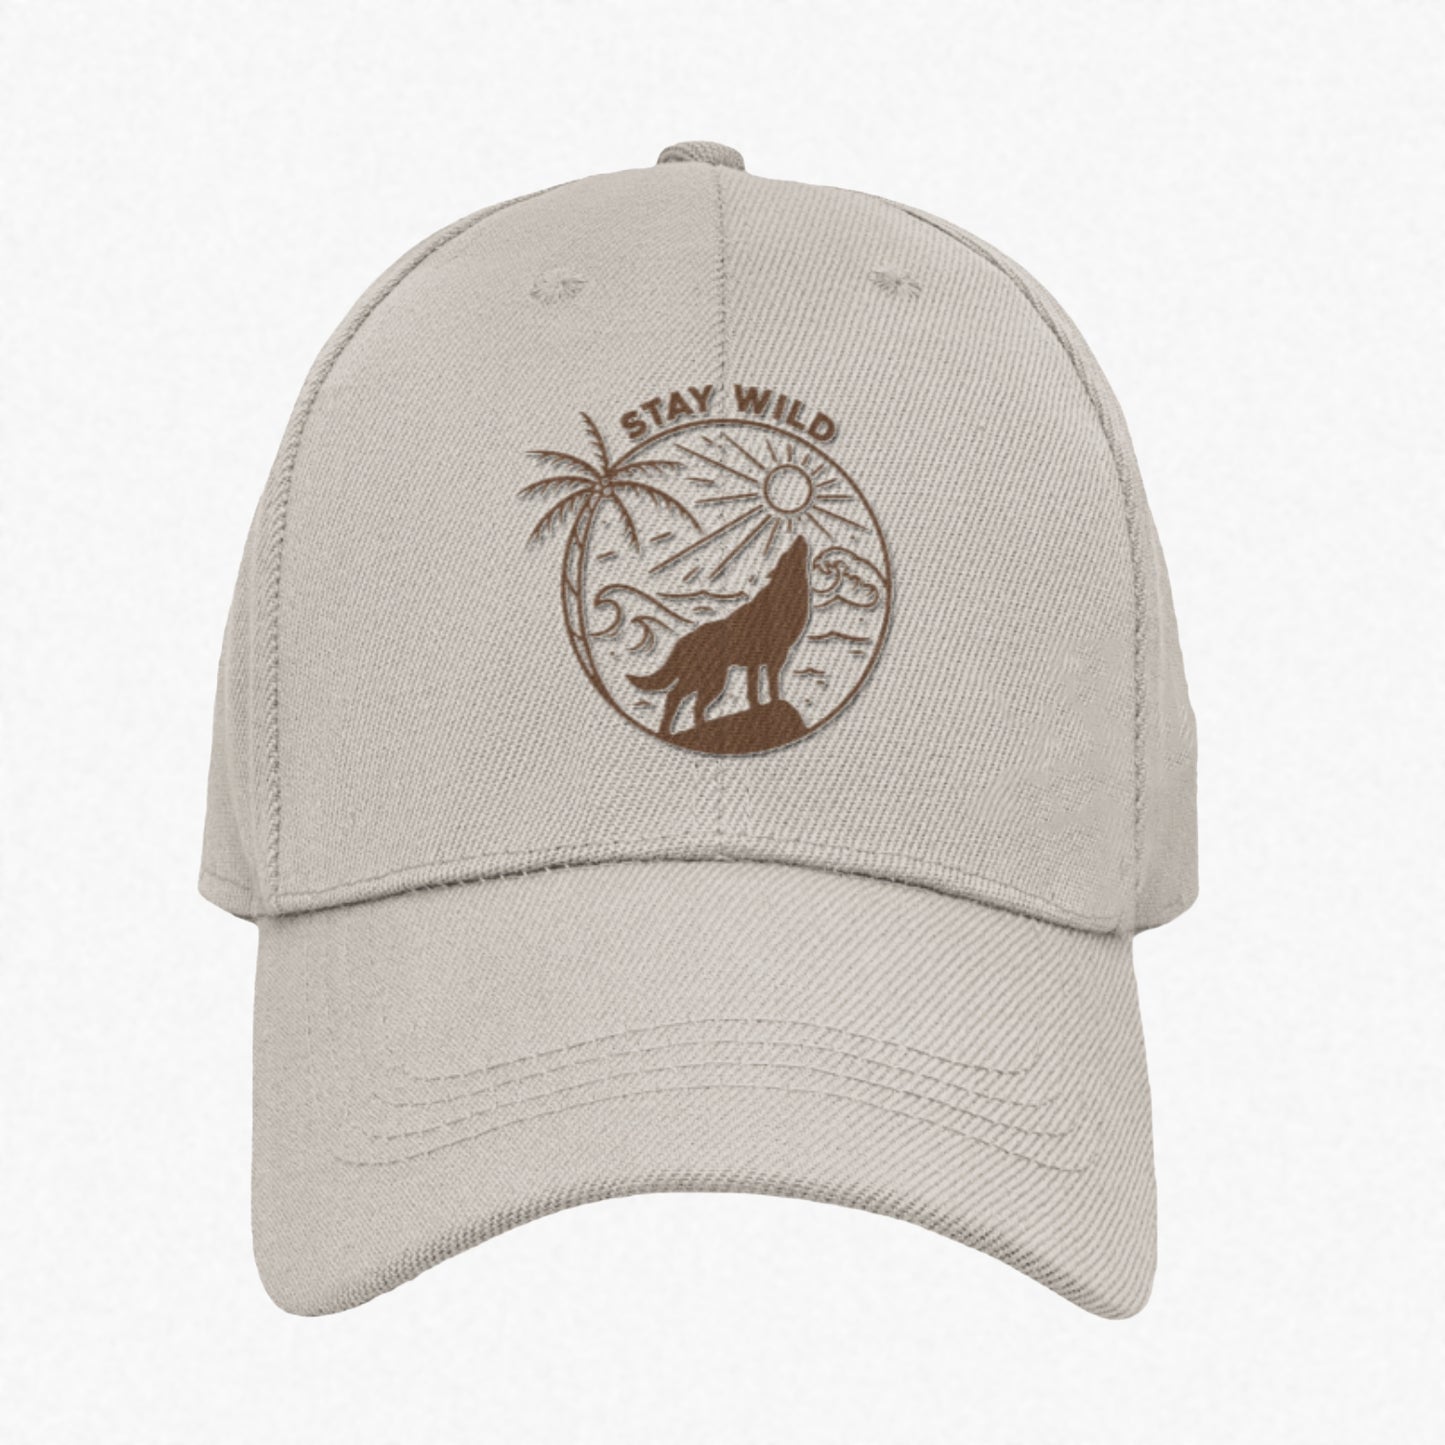 Stay Wild Embroidered Hat - Tan